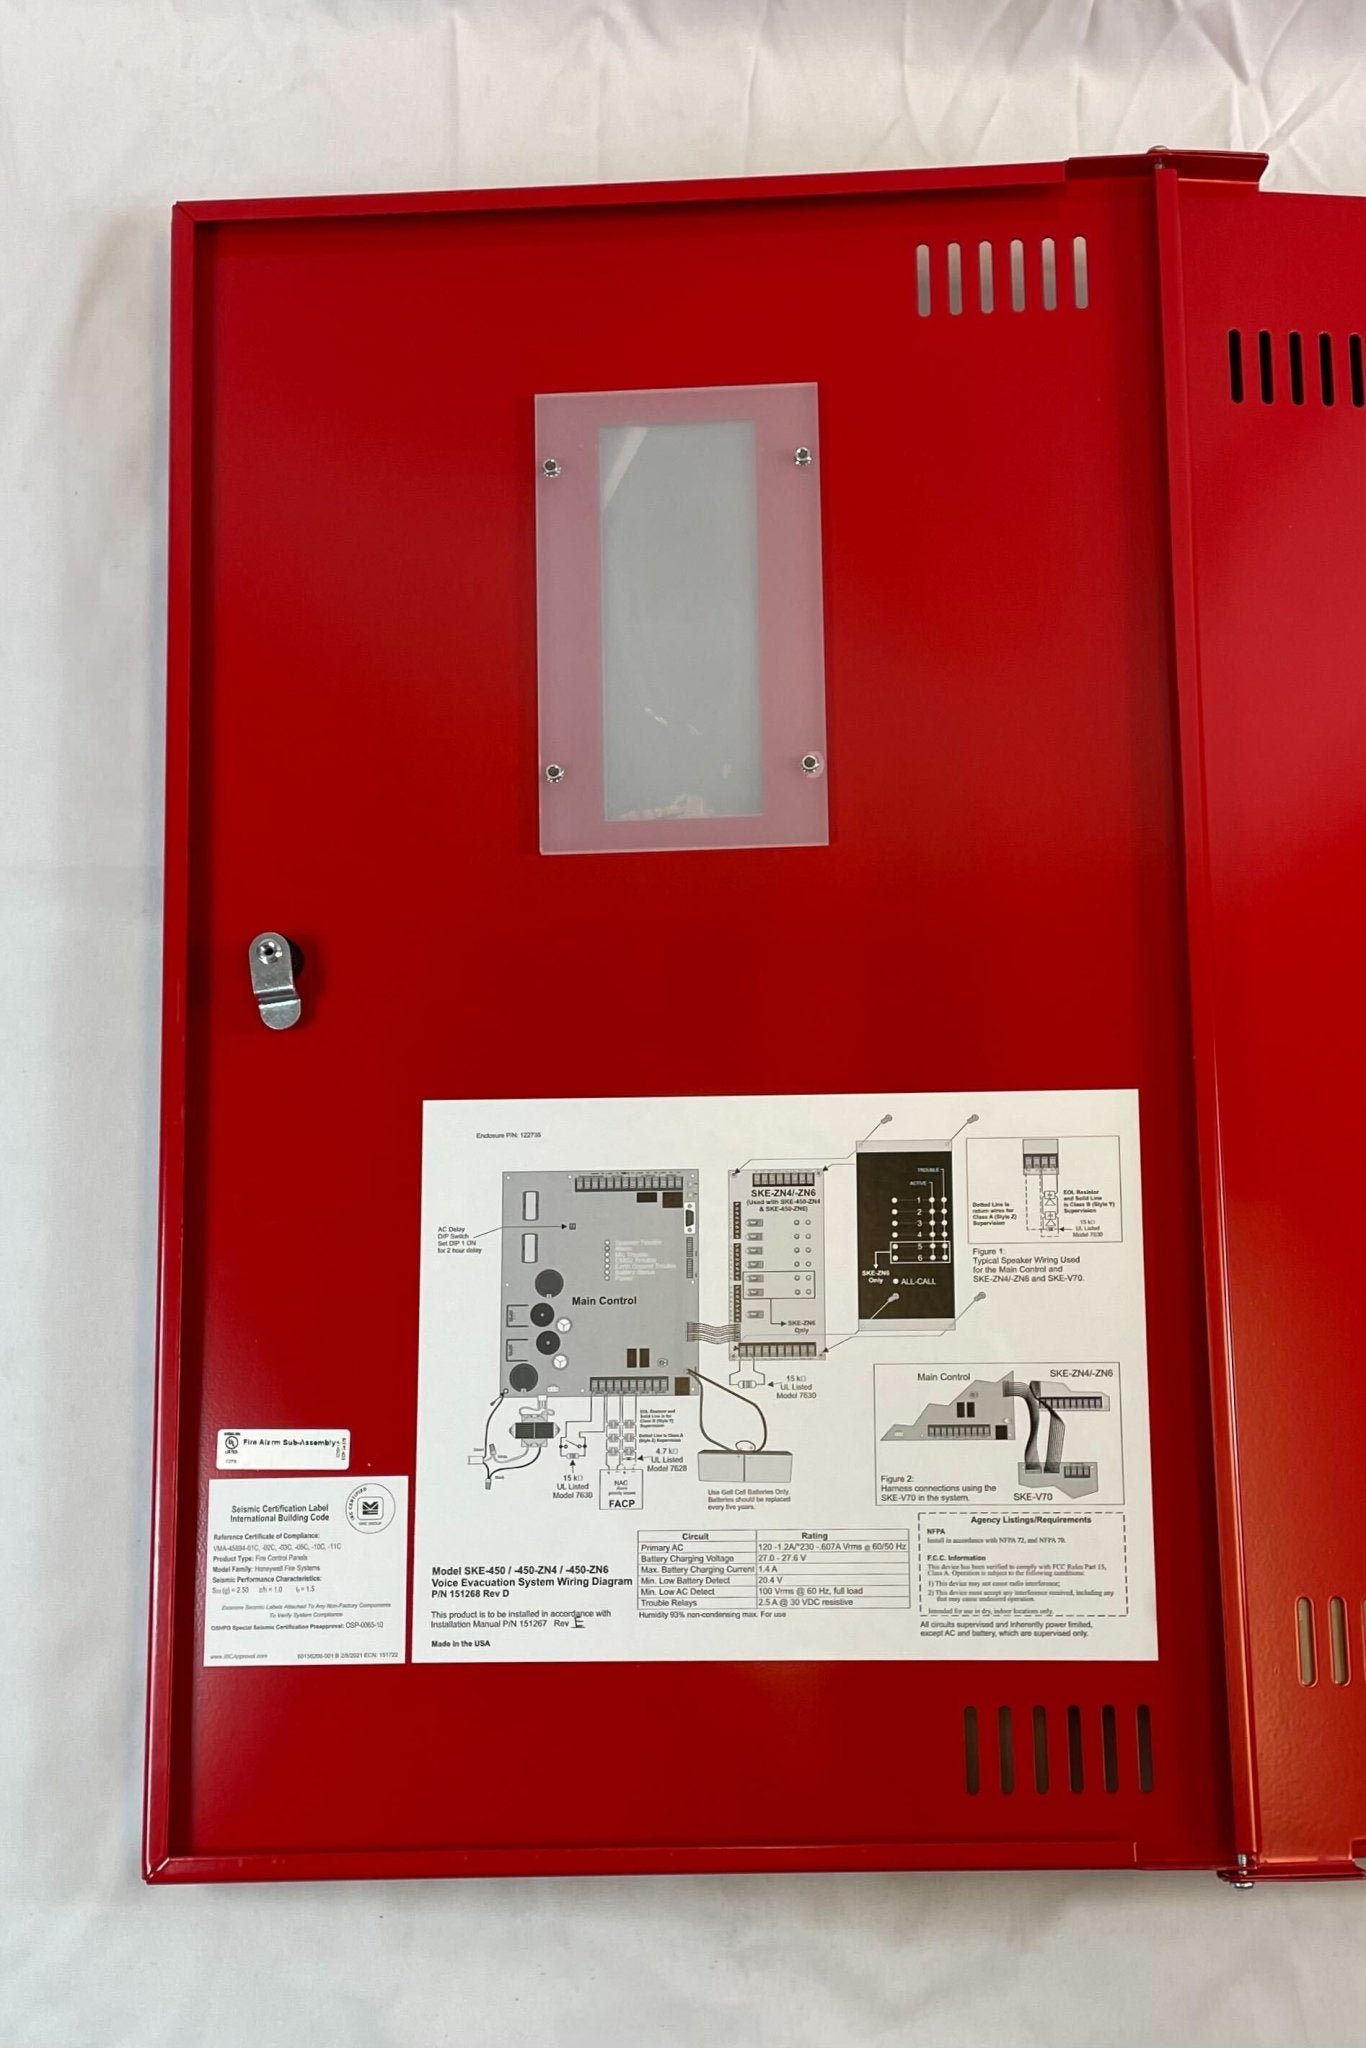 Silent Knight SKE-450 Voice Evacuation System - The Fire Alarm Supplier